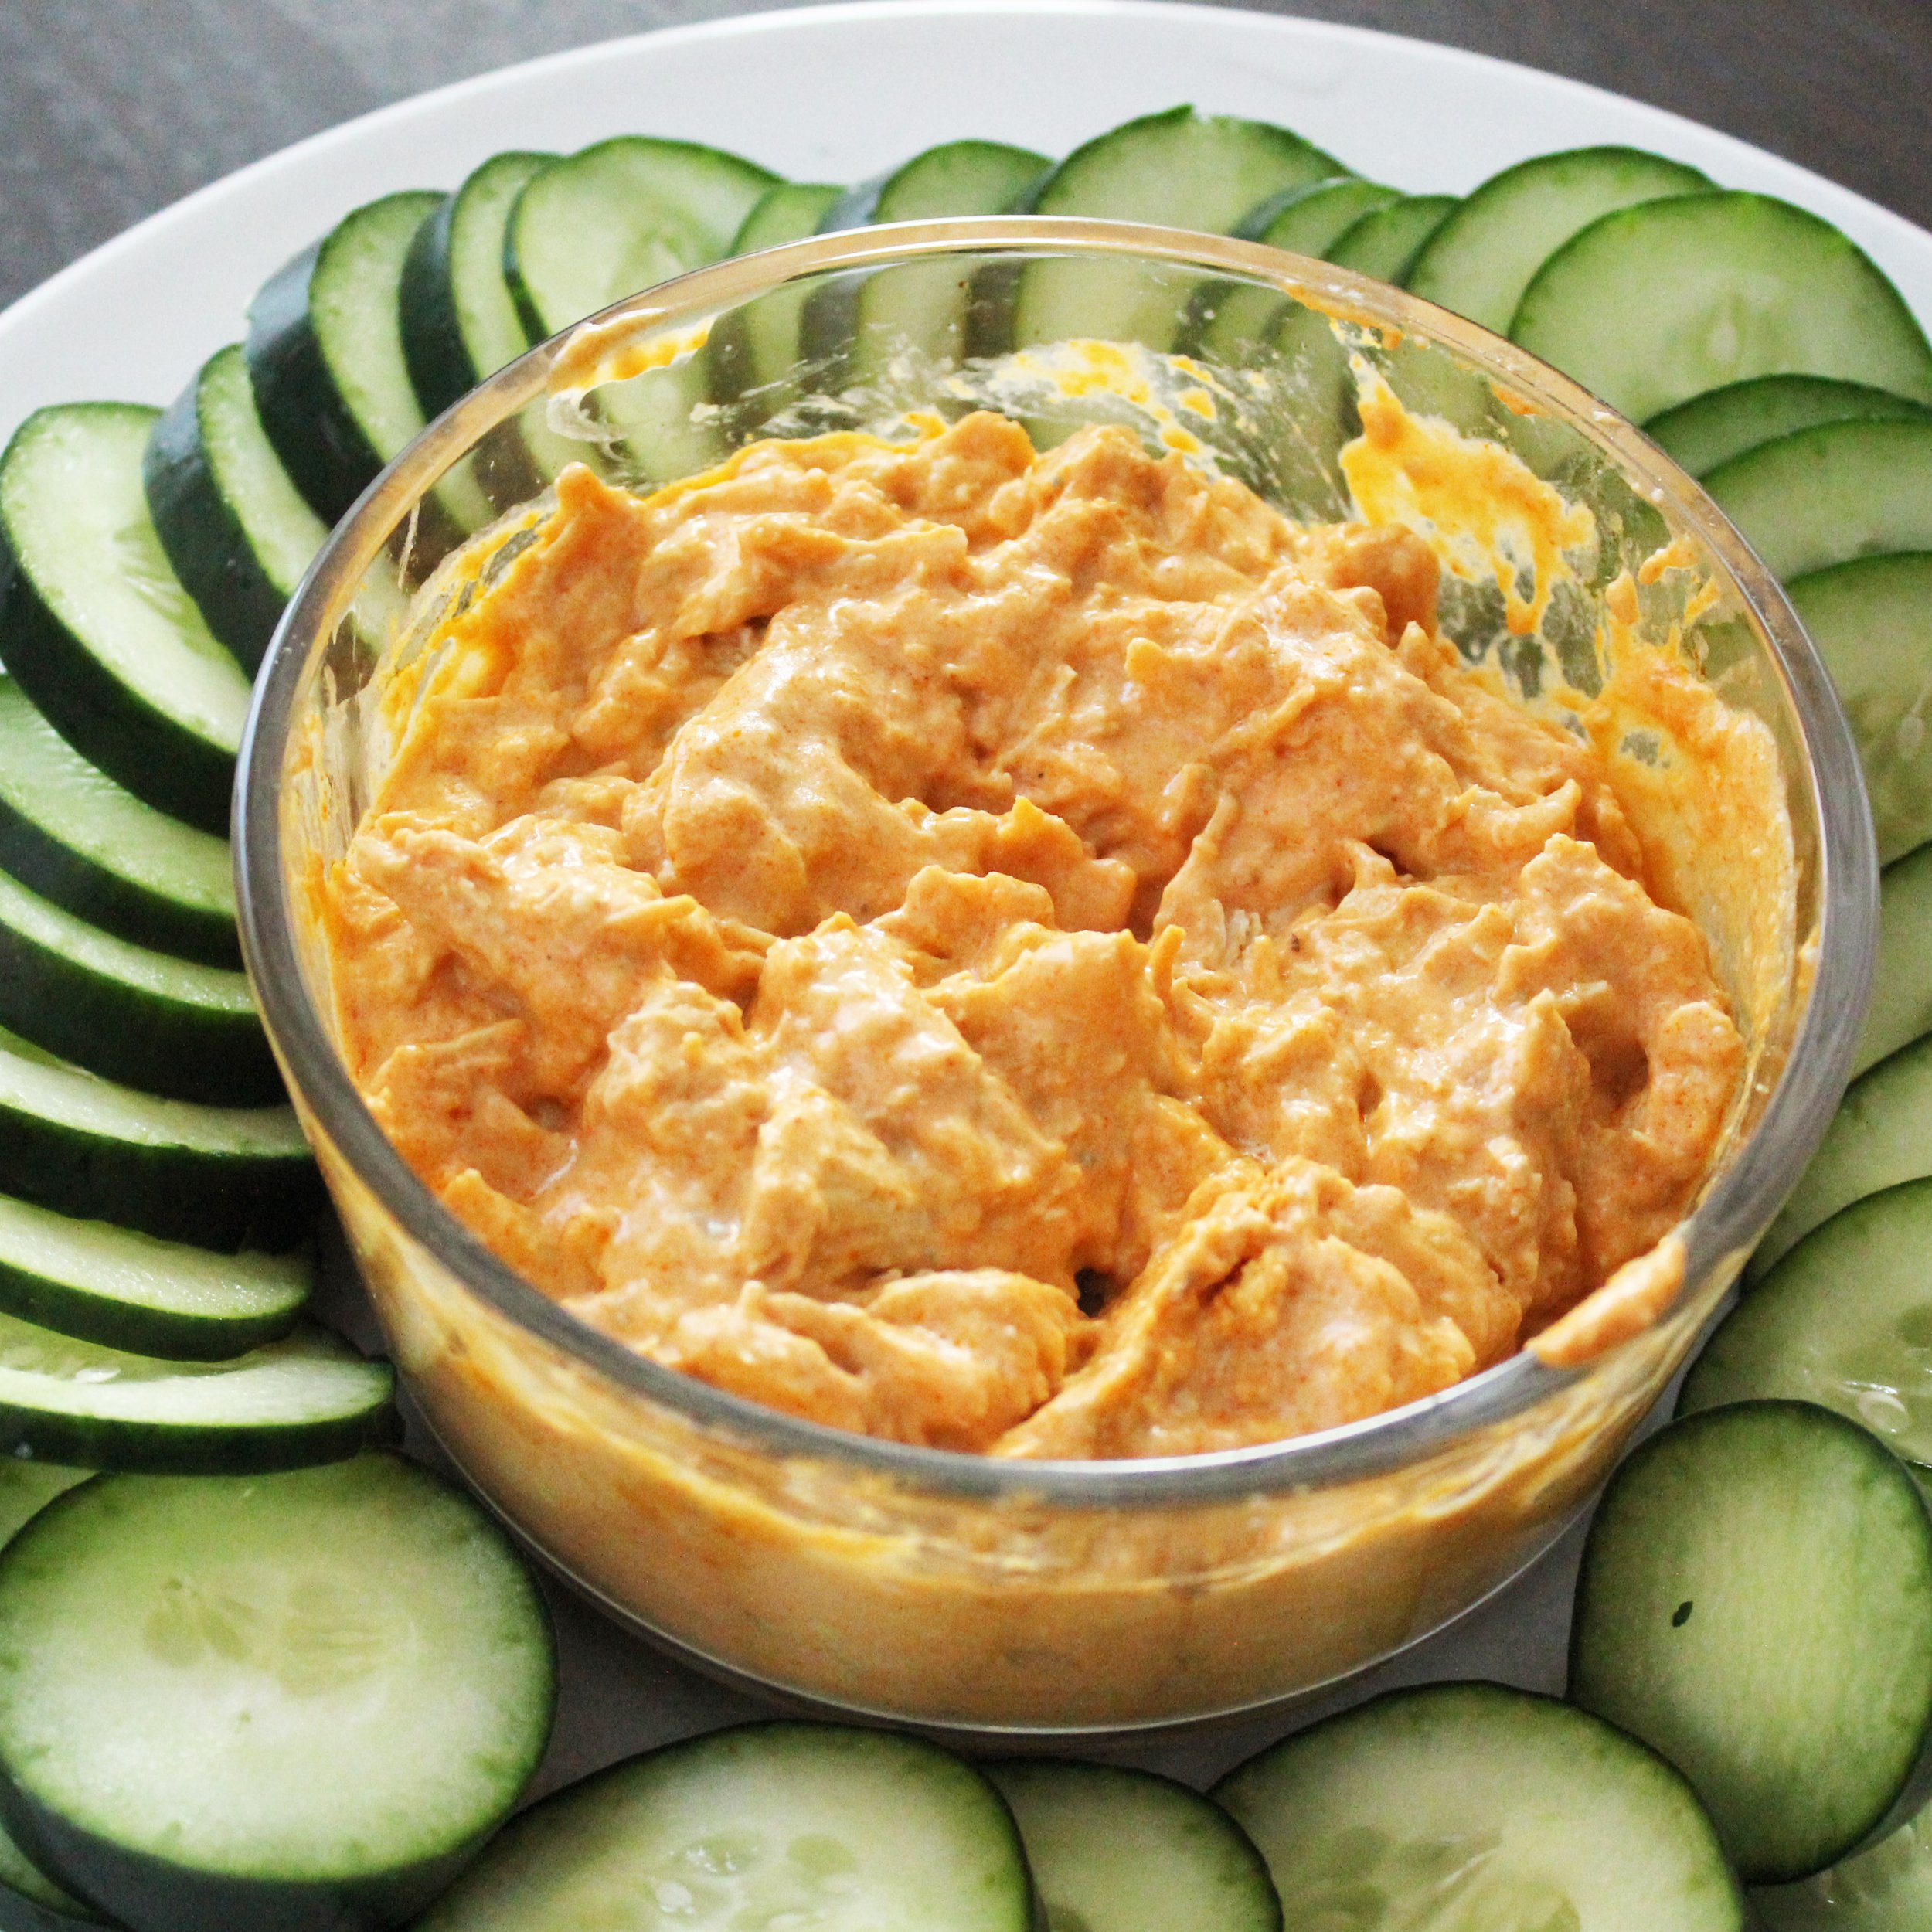 Buffalo Chicken Dip surrounded by sliced cucumbers